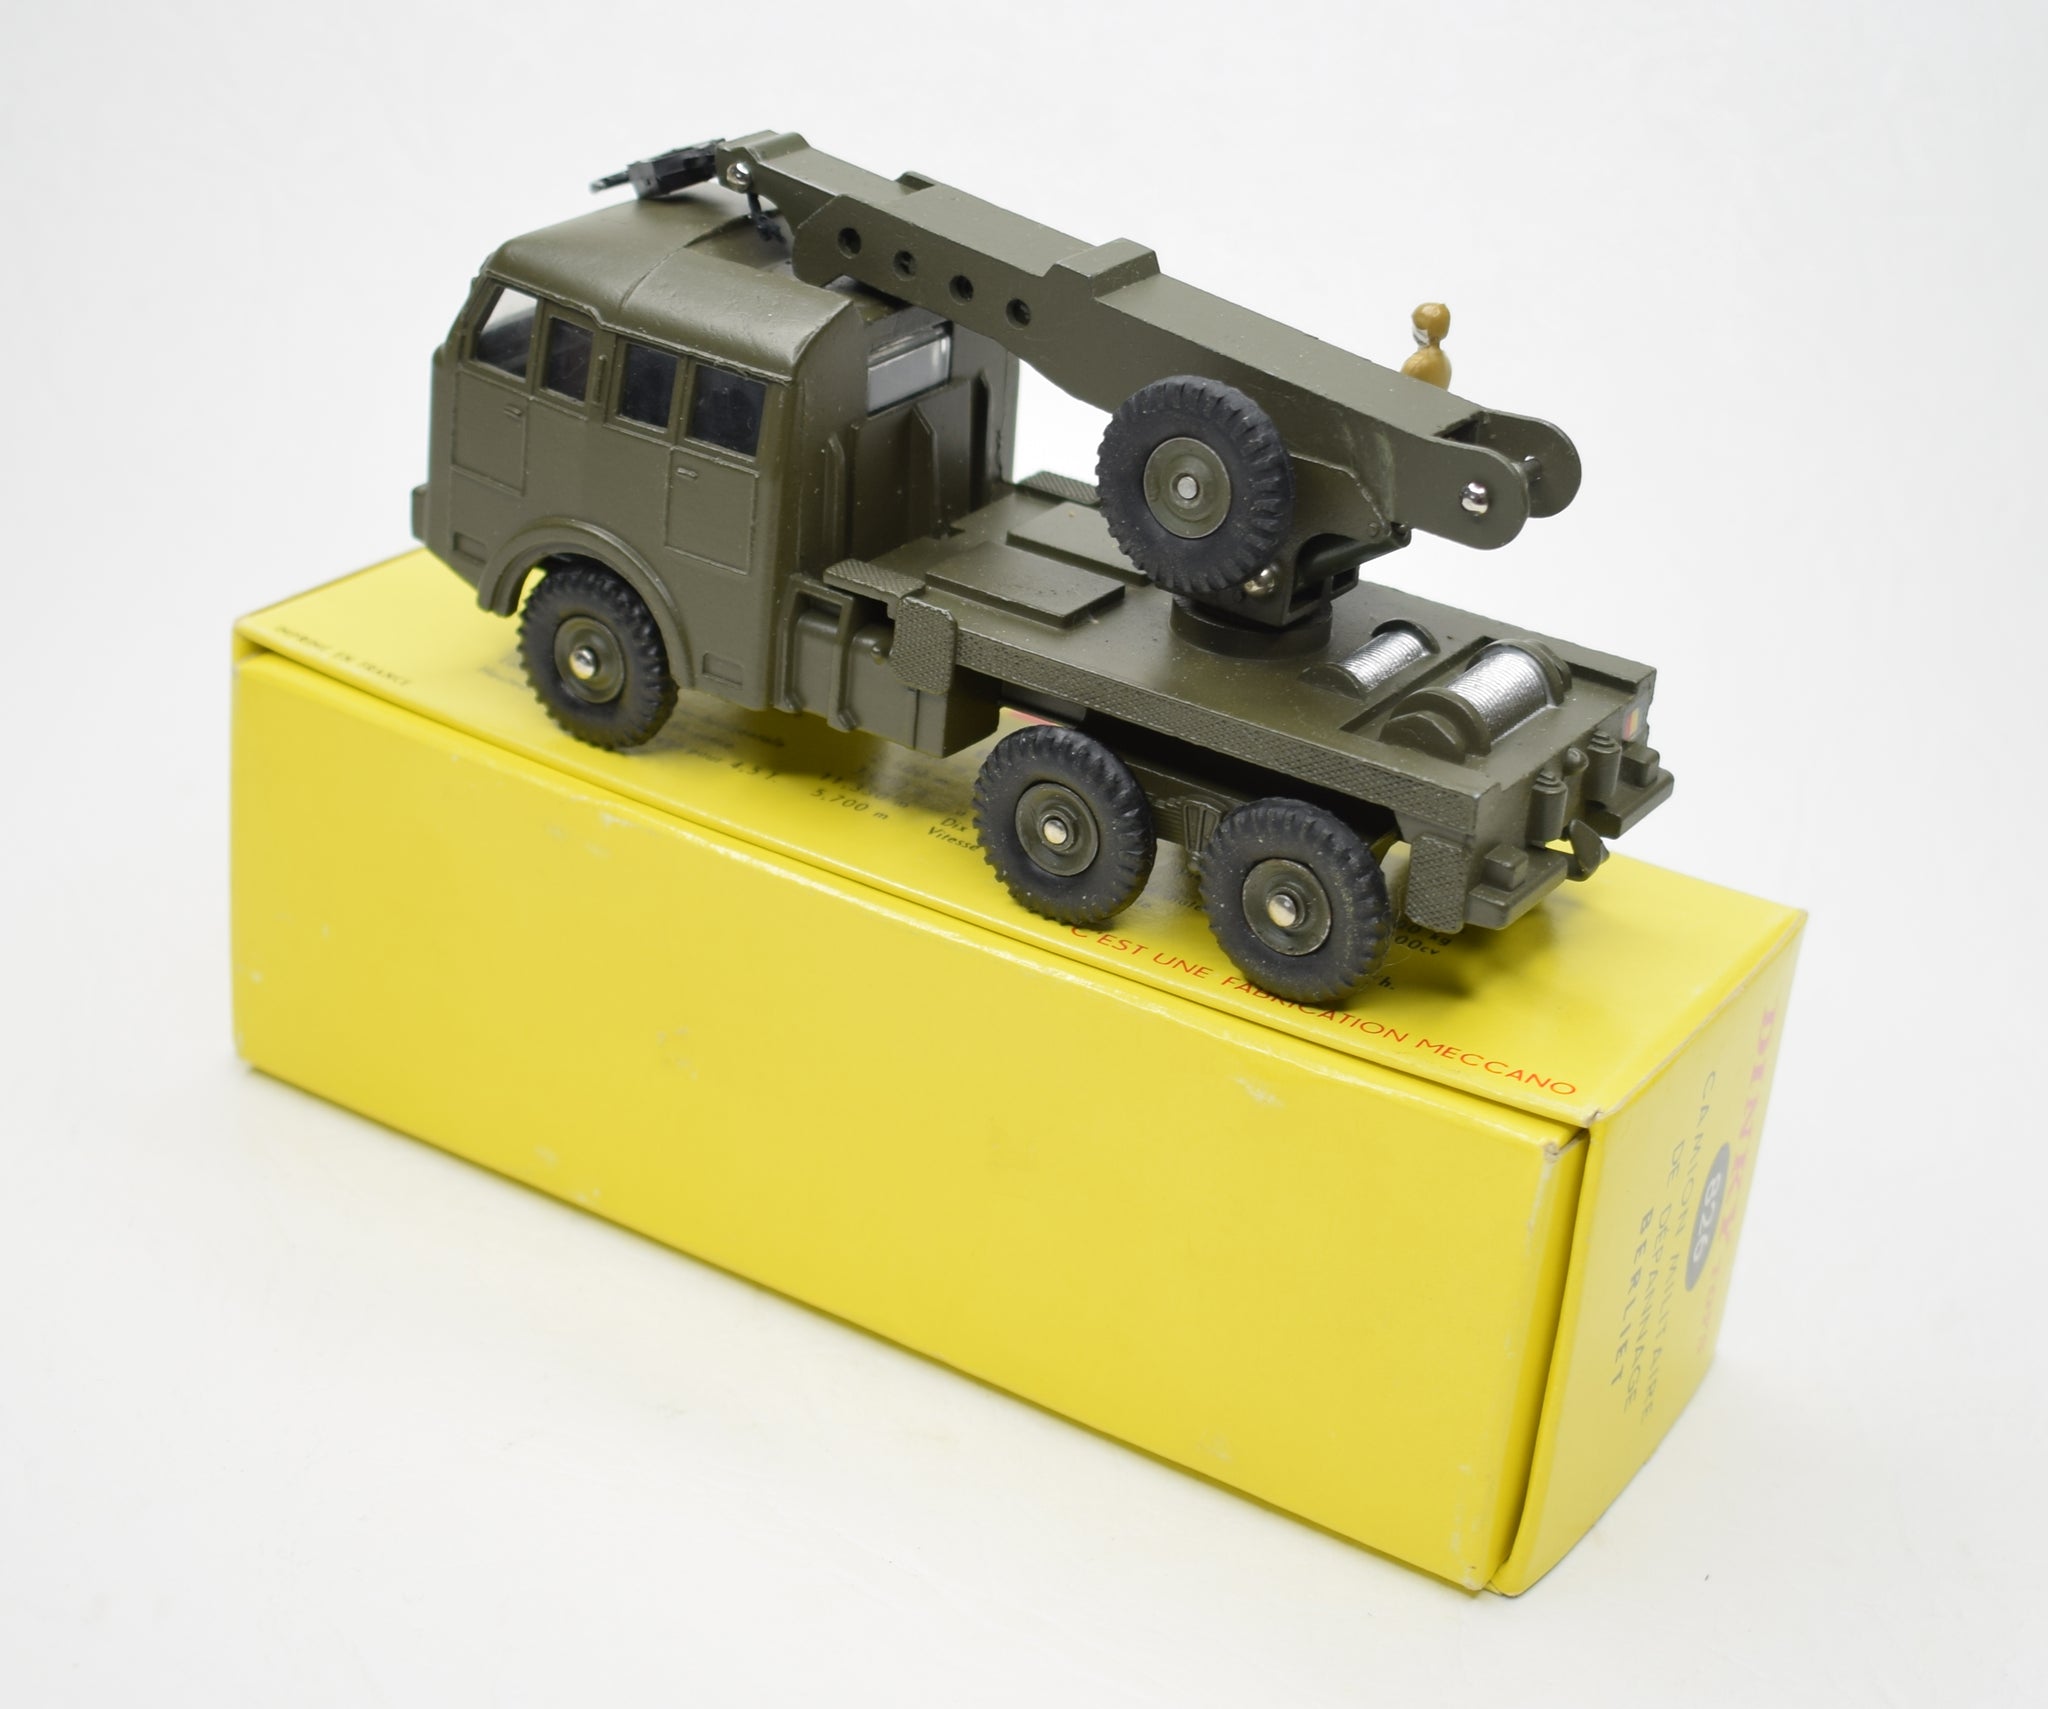 Buy French Military Dinky Toys Book Online at Low Prices in India